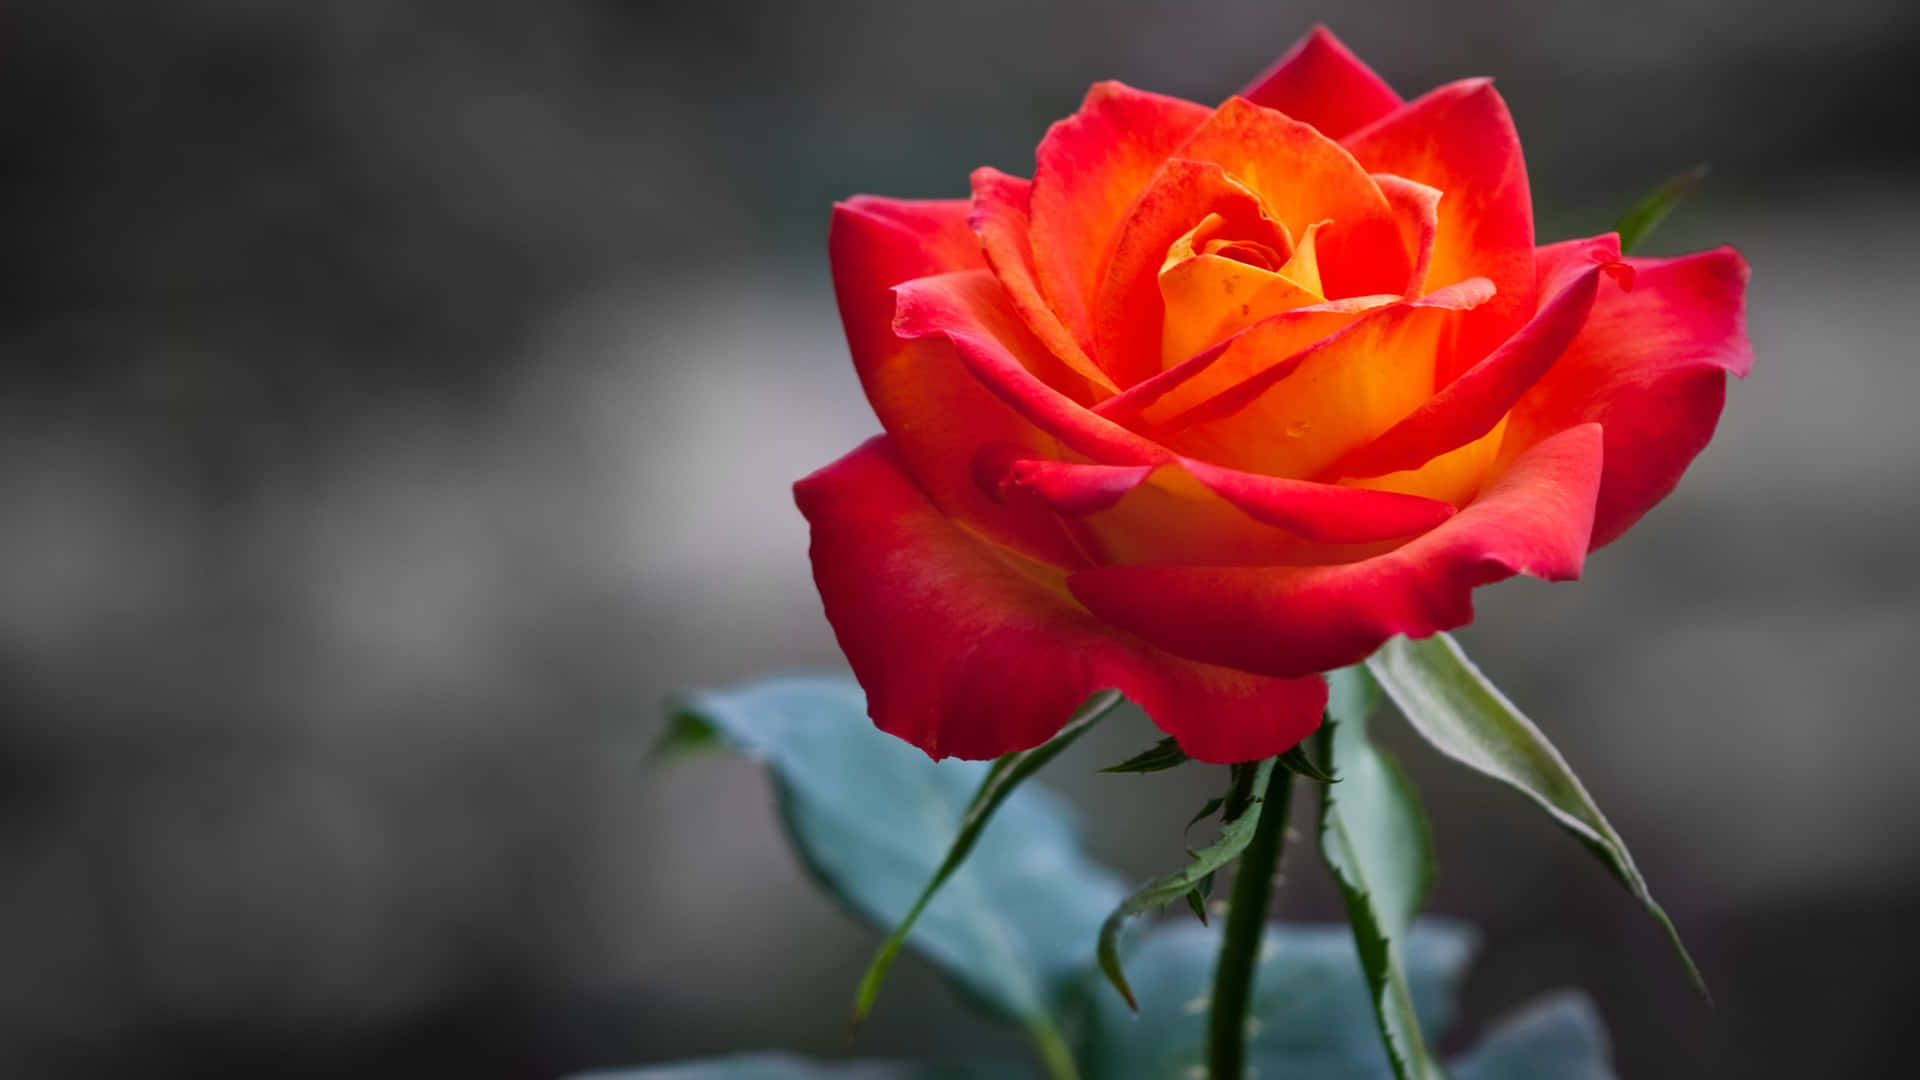 A beautiful, vibrant red rose stands out against a shadowy background. Wallpaper